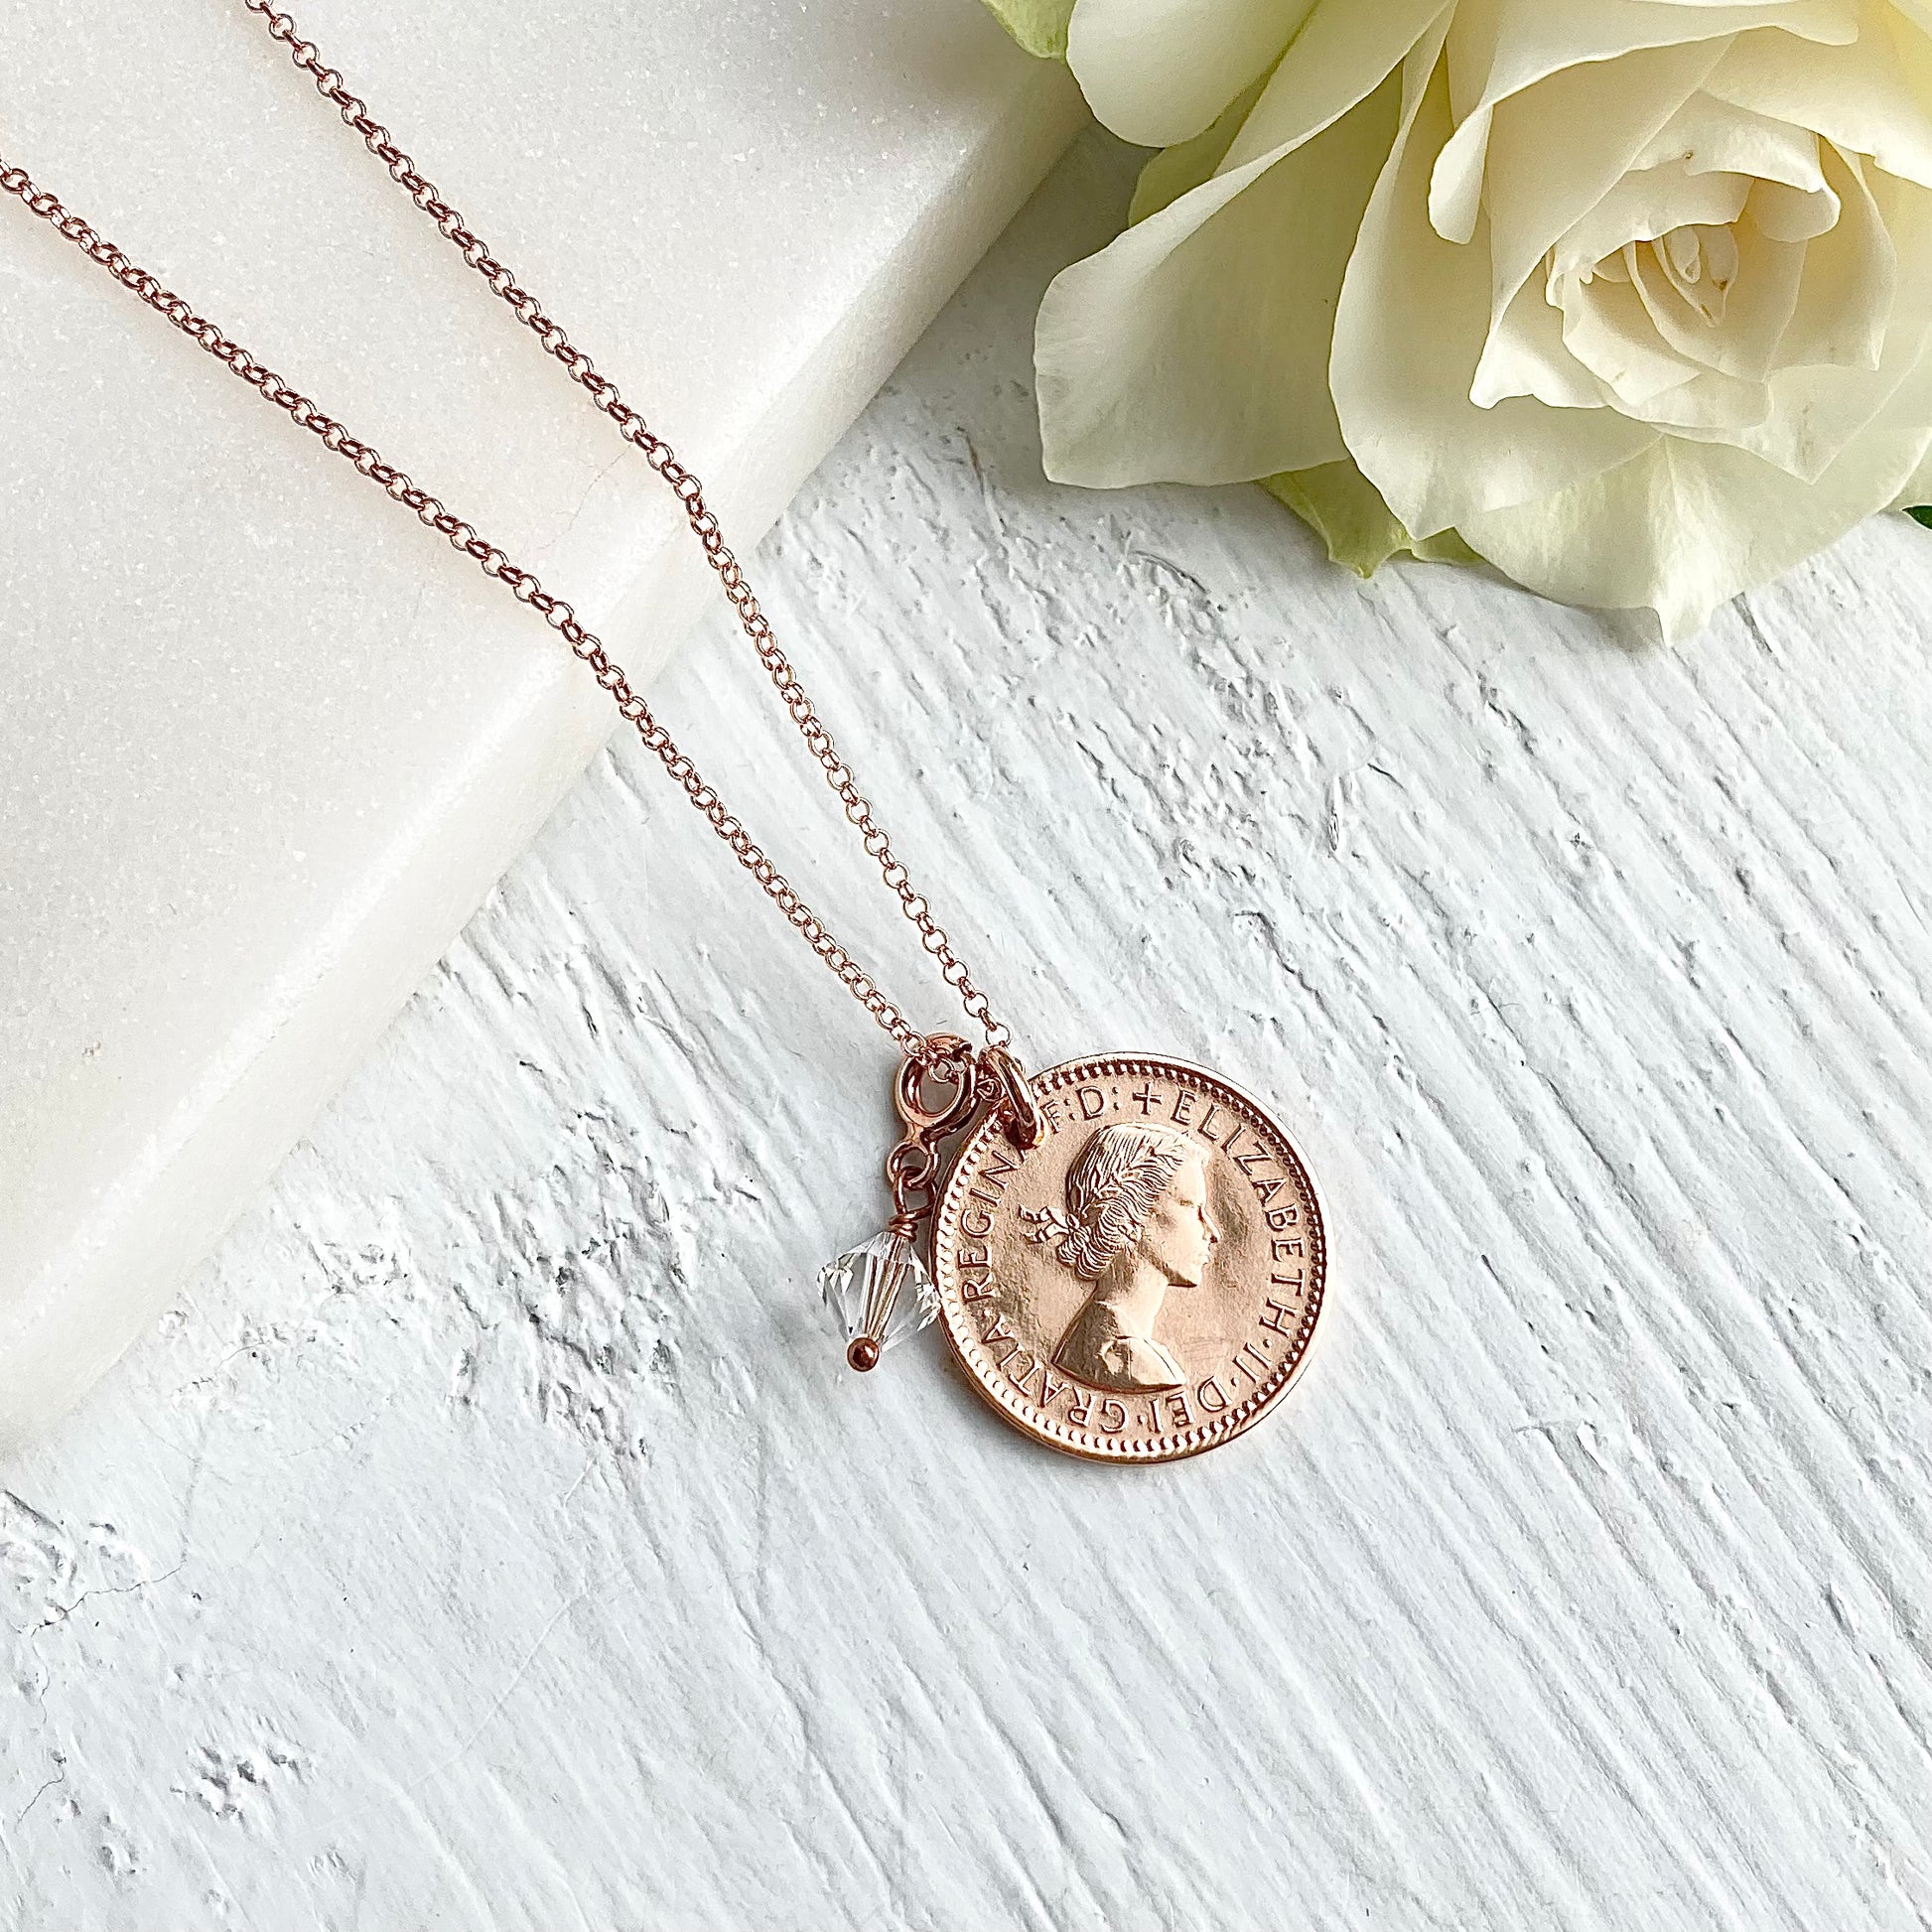 Prenoa coin necklaces for 70th birthdays, buy coin pendant gifts for her